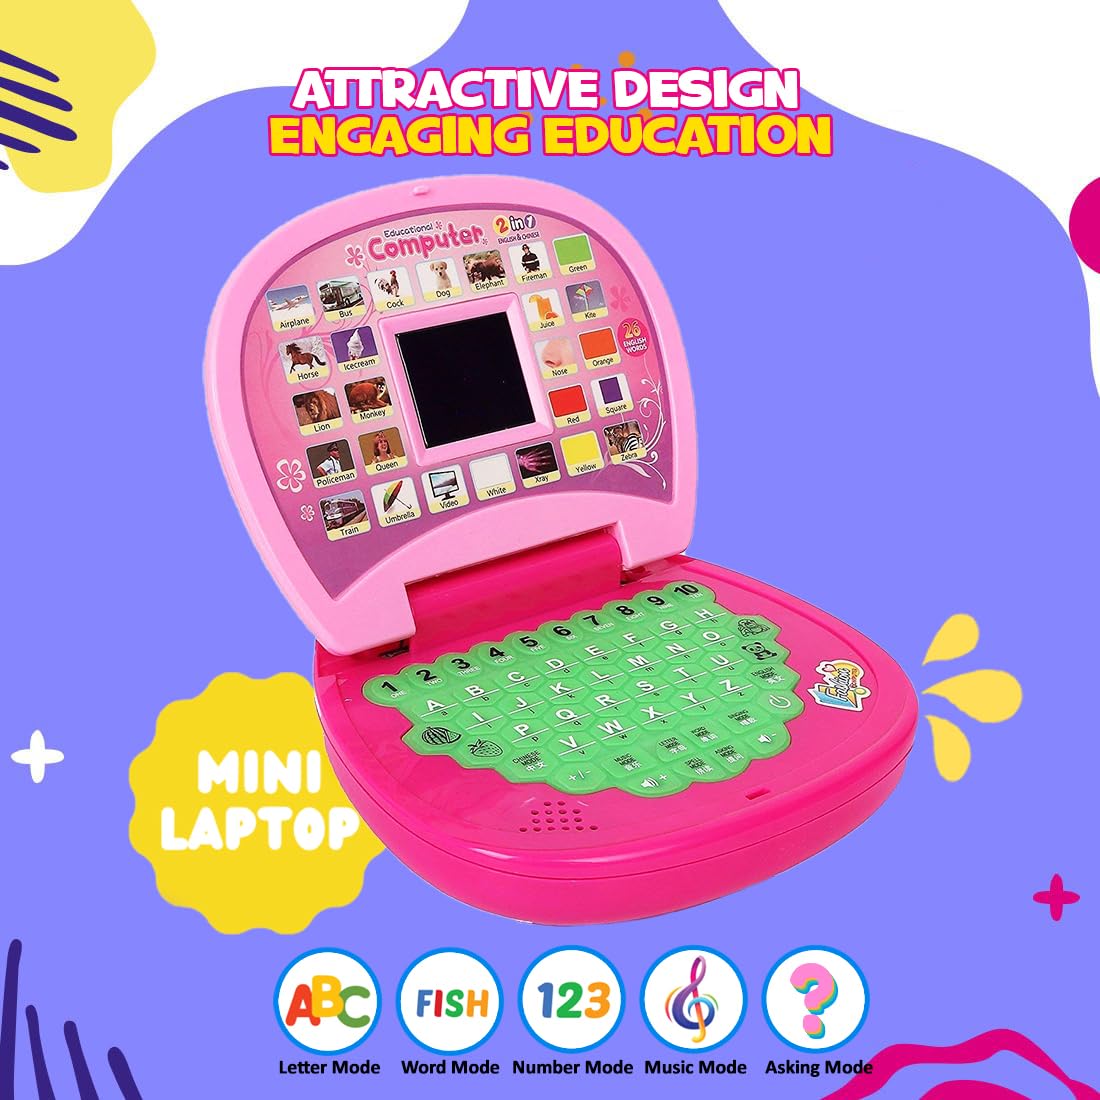 Kids Computer Toy Baby Laptops for Kids